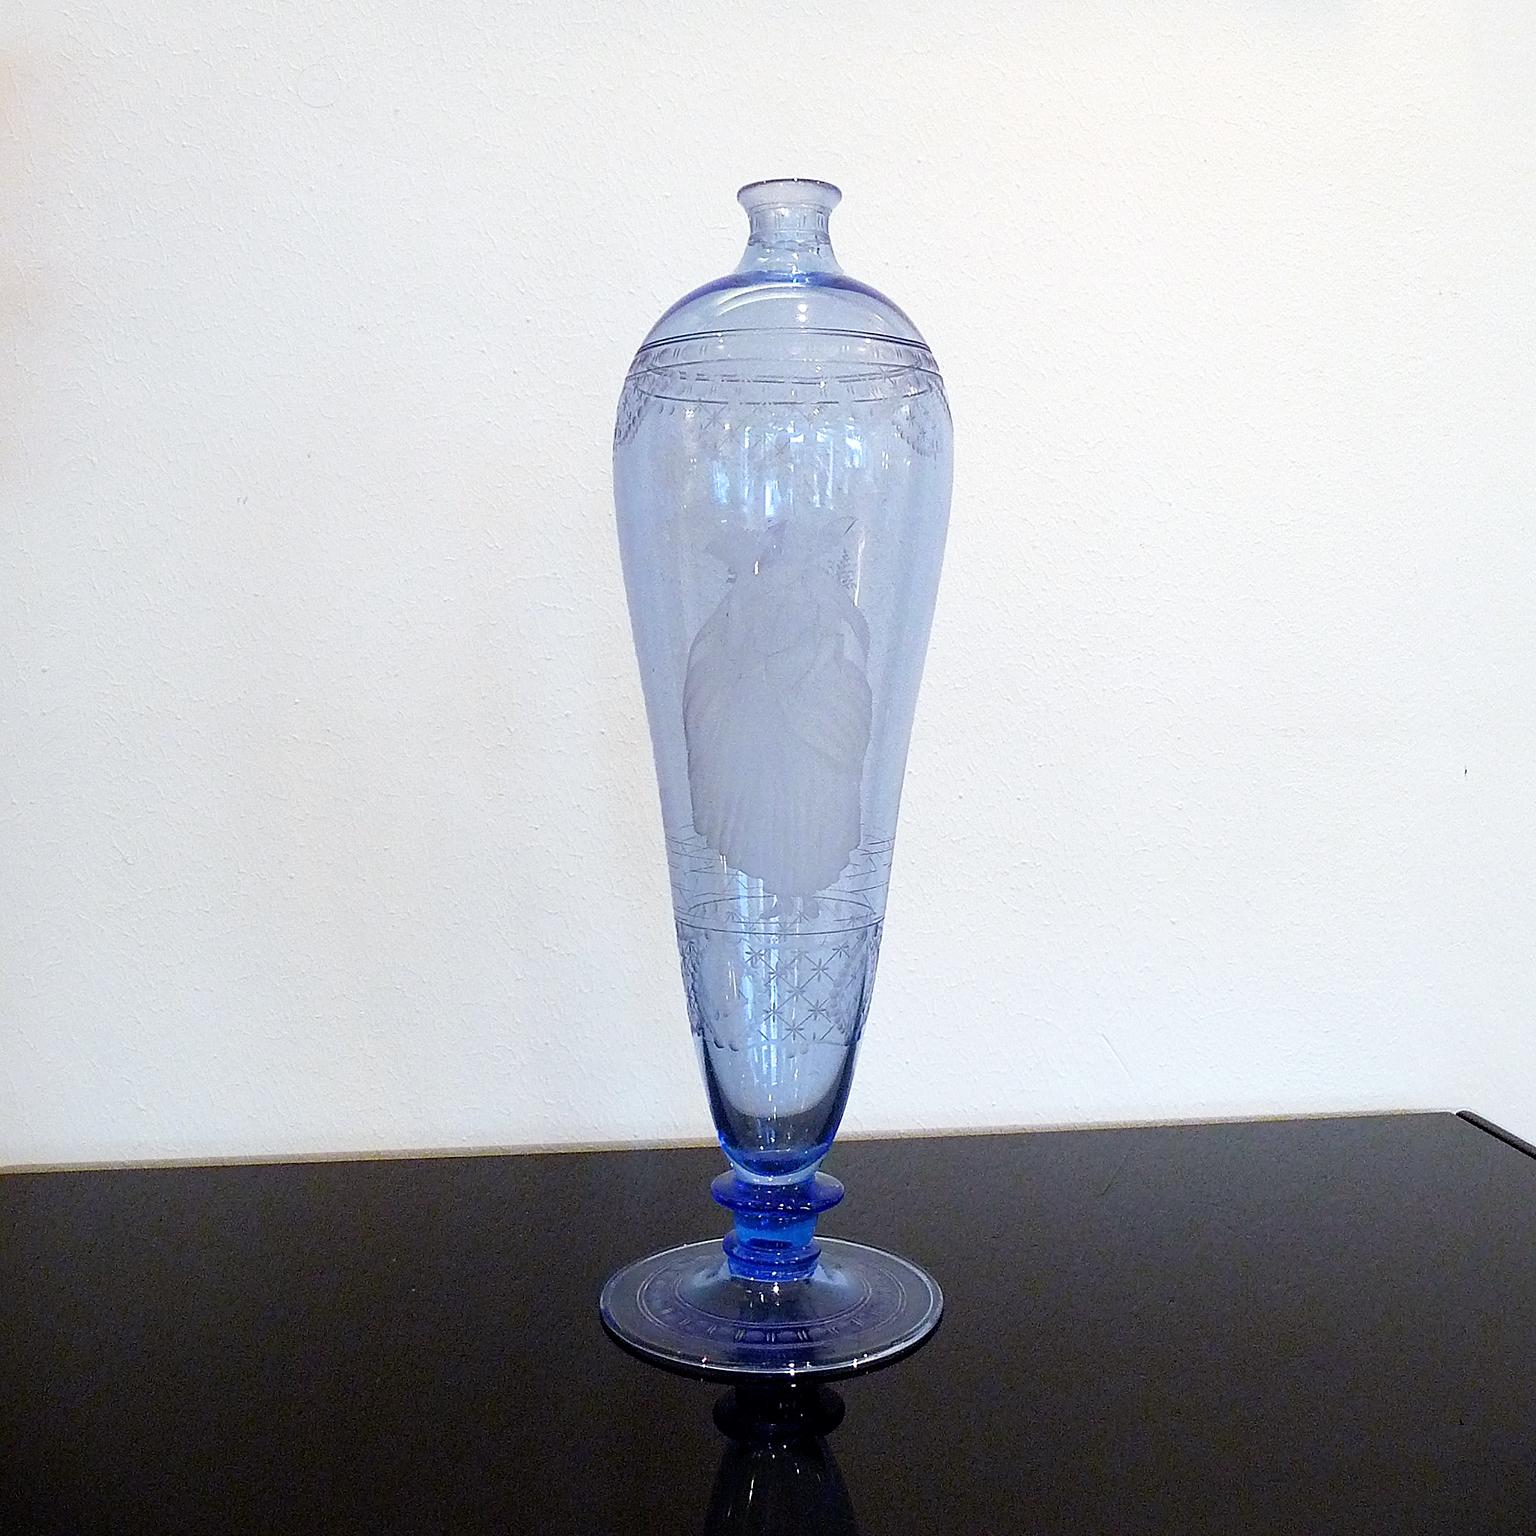 Midcentury Murano Glass Bottle by Guido Balsamo Stella for S.A.L.I.R (Mitte des 20. Jahrhunderts)